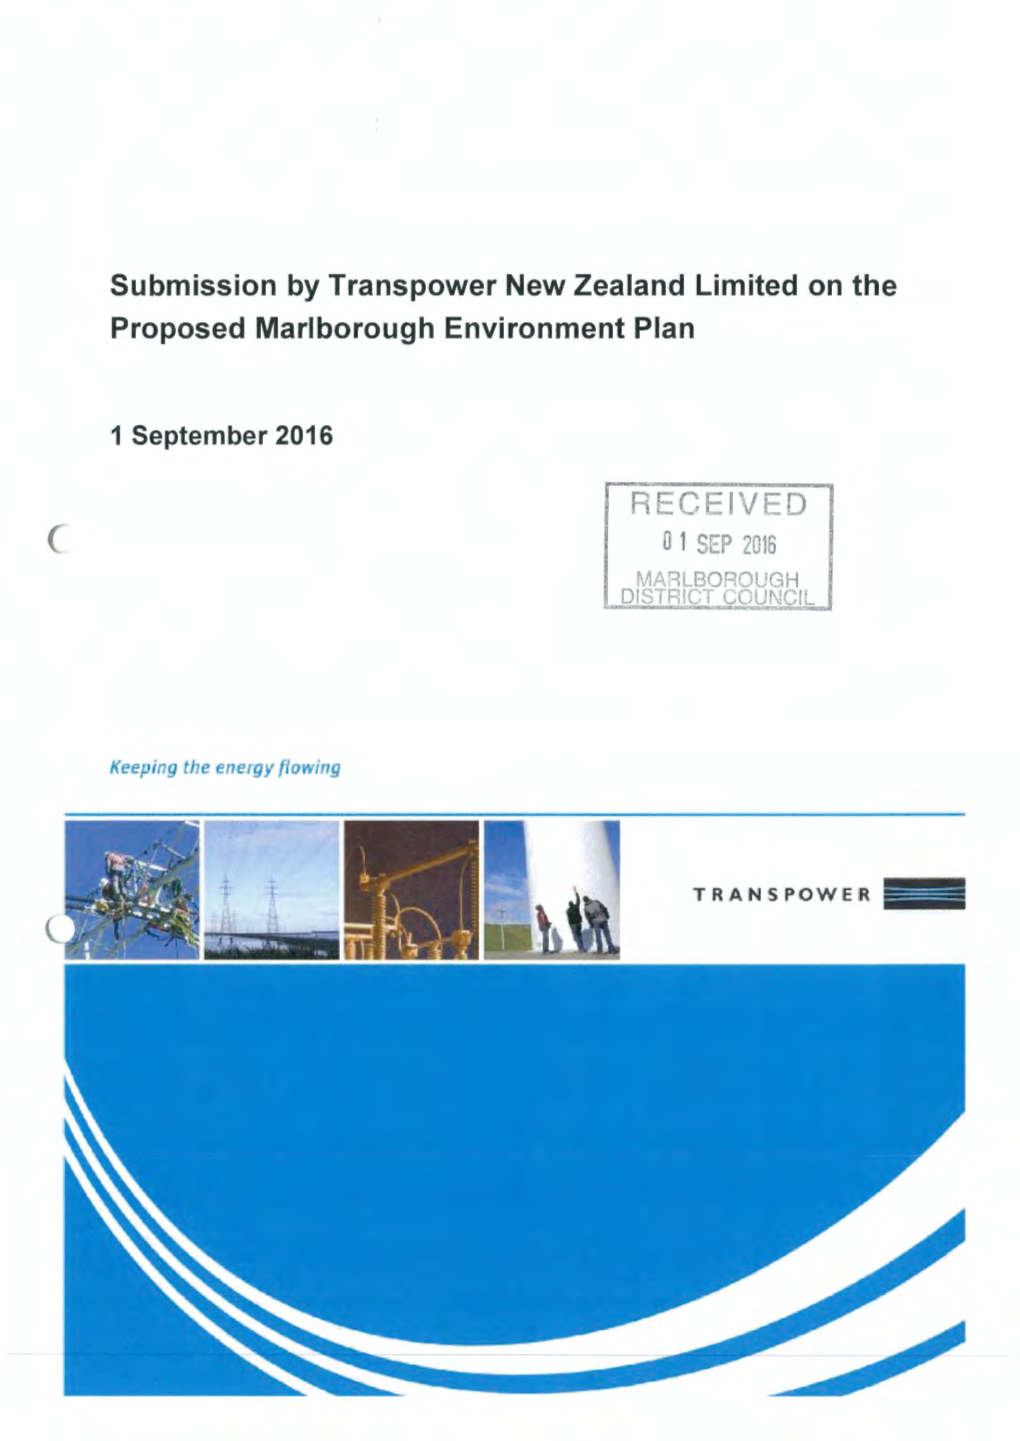 Transpower New Zealand Limited on the Proposed Marlborough Environment Plan